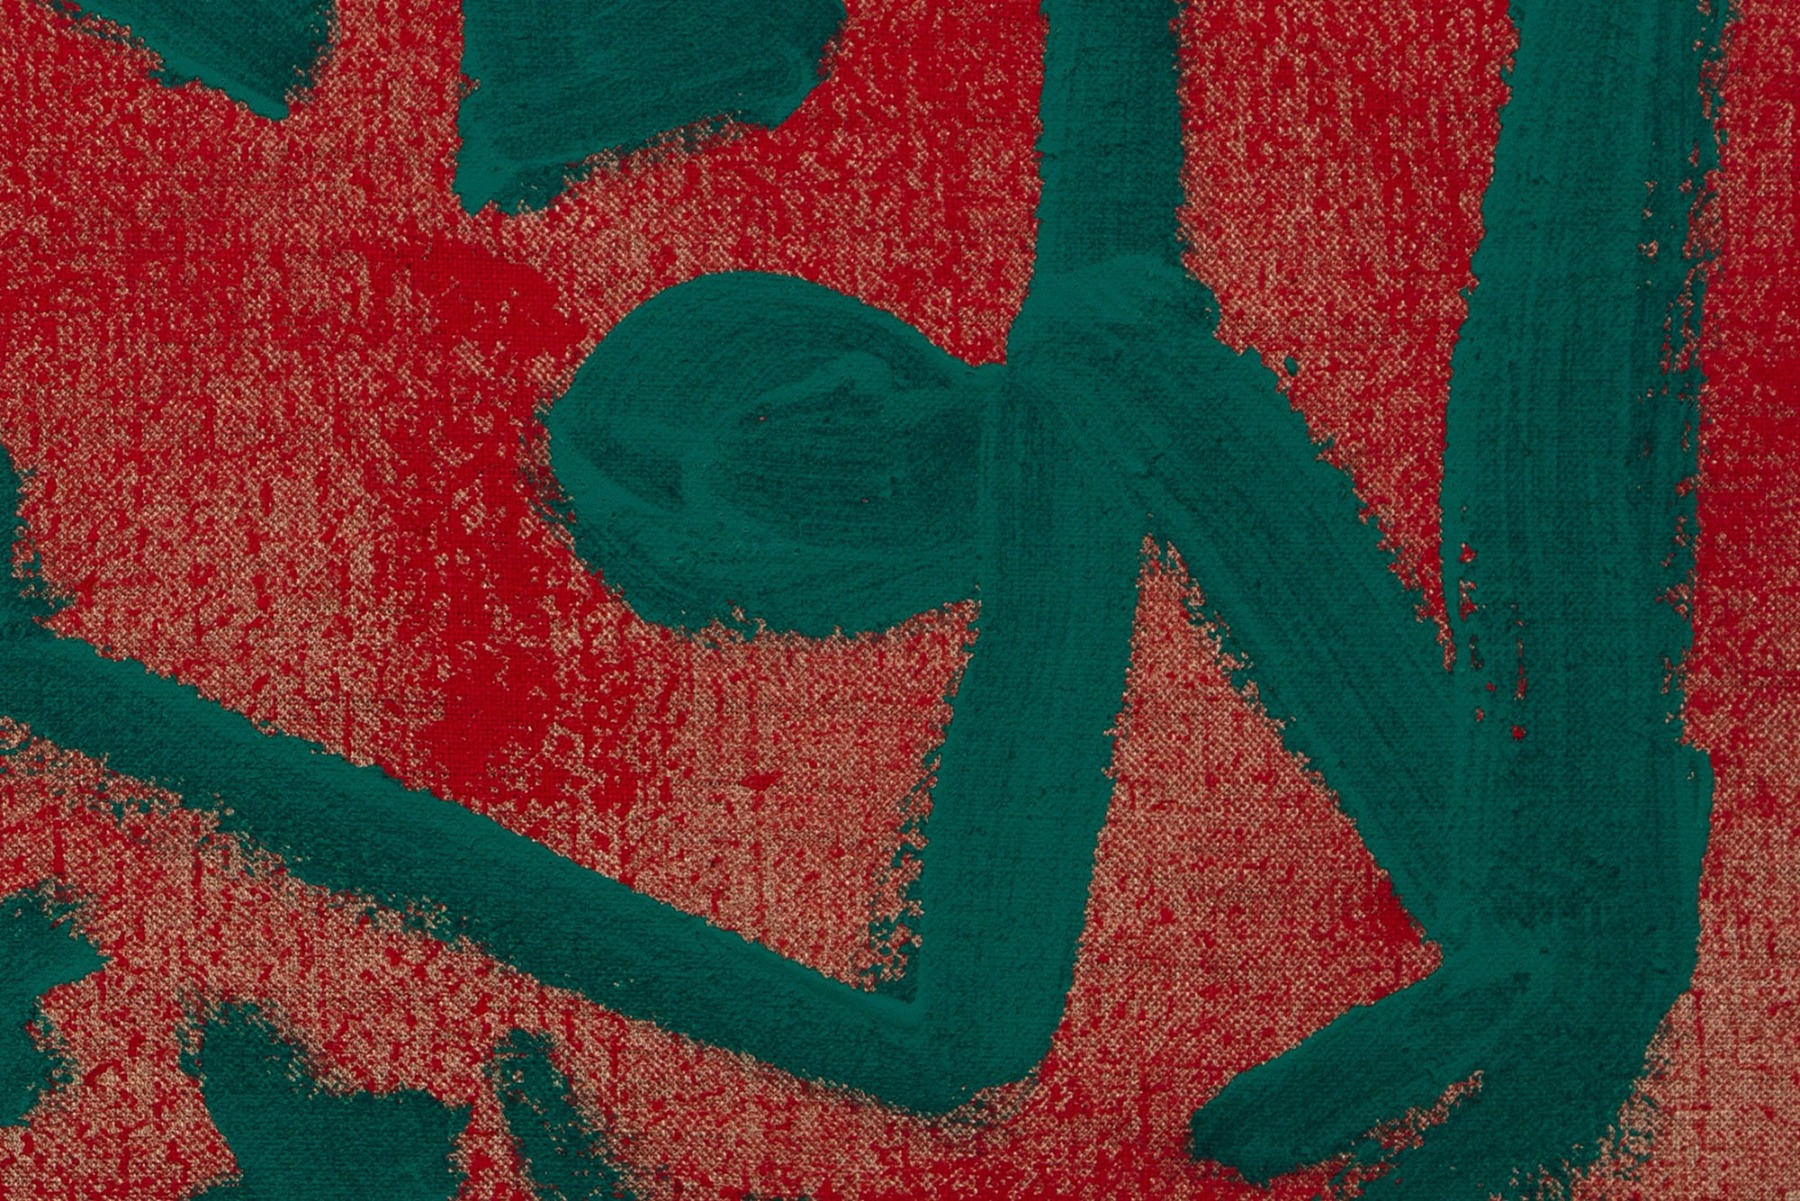 A.R. Penck, Untitled, 1987-1988